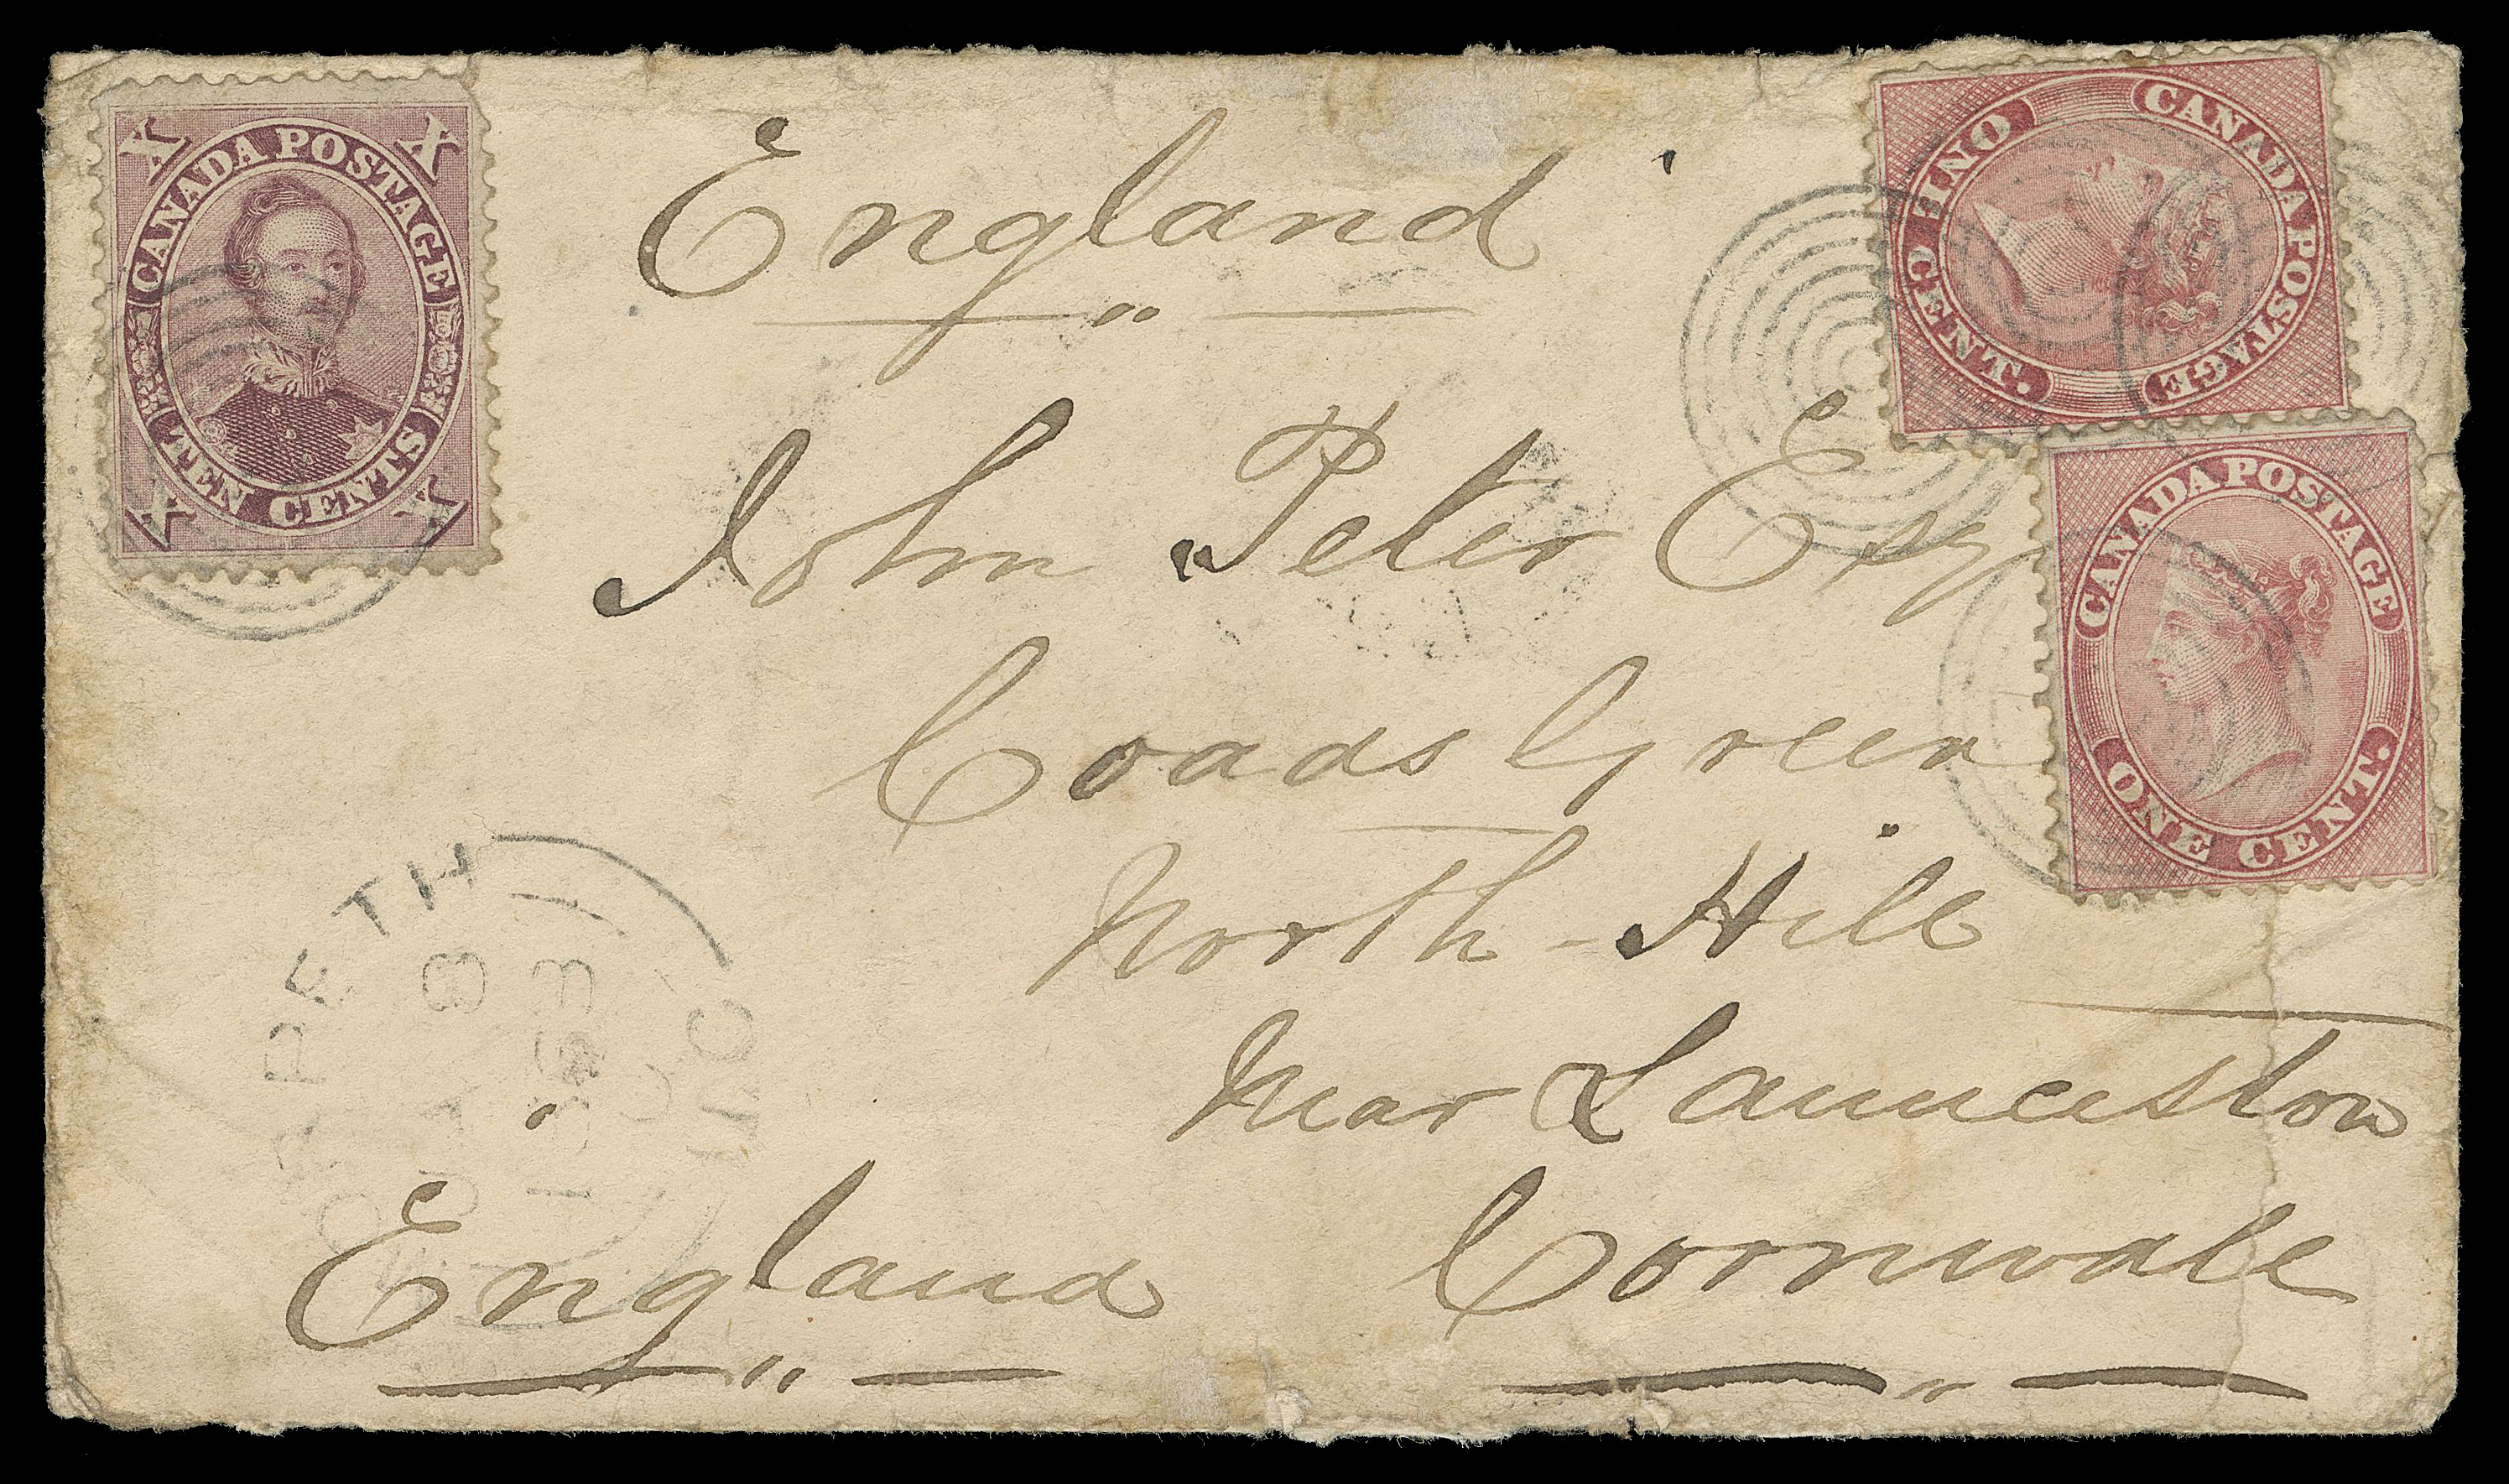 SIX PENCE AND TEN CENTS  1868 (January 8) Cover bearing an alternative franking to make up the 12½ cent rate via Allan Line to the United Kingdom, with a 10c brown purple and two 1c rose, stamps with small flaws, neatly tied by concentric rings to faulty cover with ageing, light Morpeth double arc dispatch datestamp; perhaps the needed ½ cent was paid in cash. On reverse Montreal JA 10 transit and neat Launceston JA 25 68 CDS on arrival. Despite the imperfections, a very scarce cover with great character and Fine appearance; unlisted in the Arfken & Leggett handbook which tabulates Firby